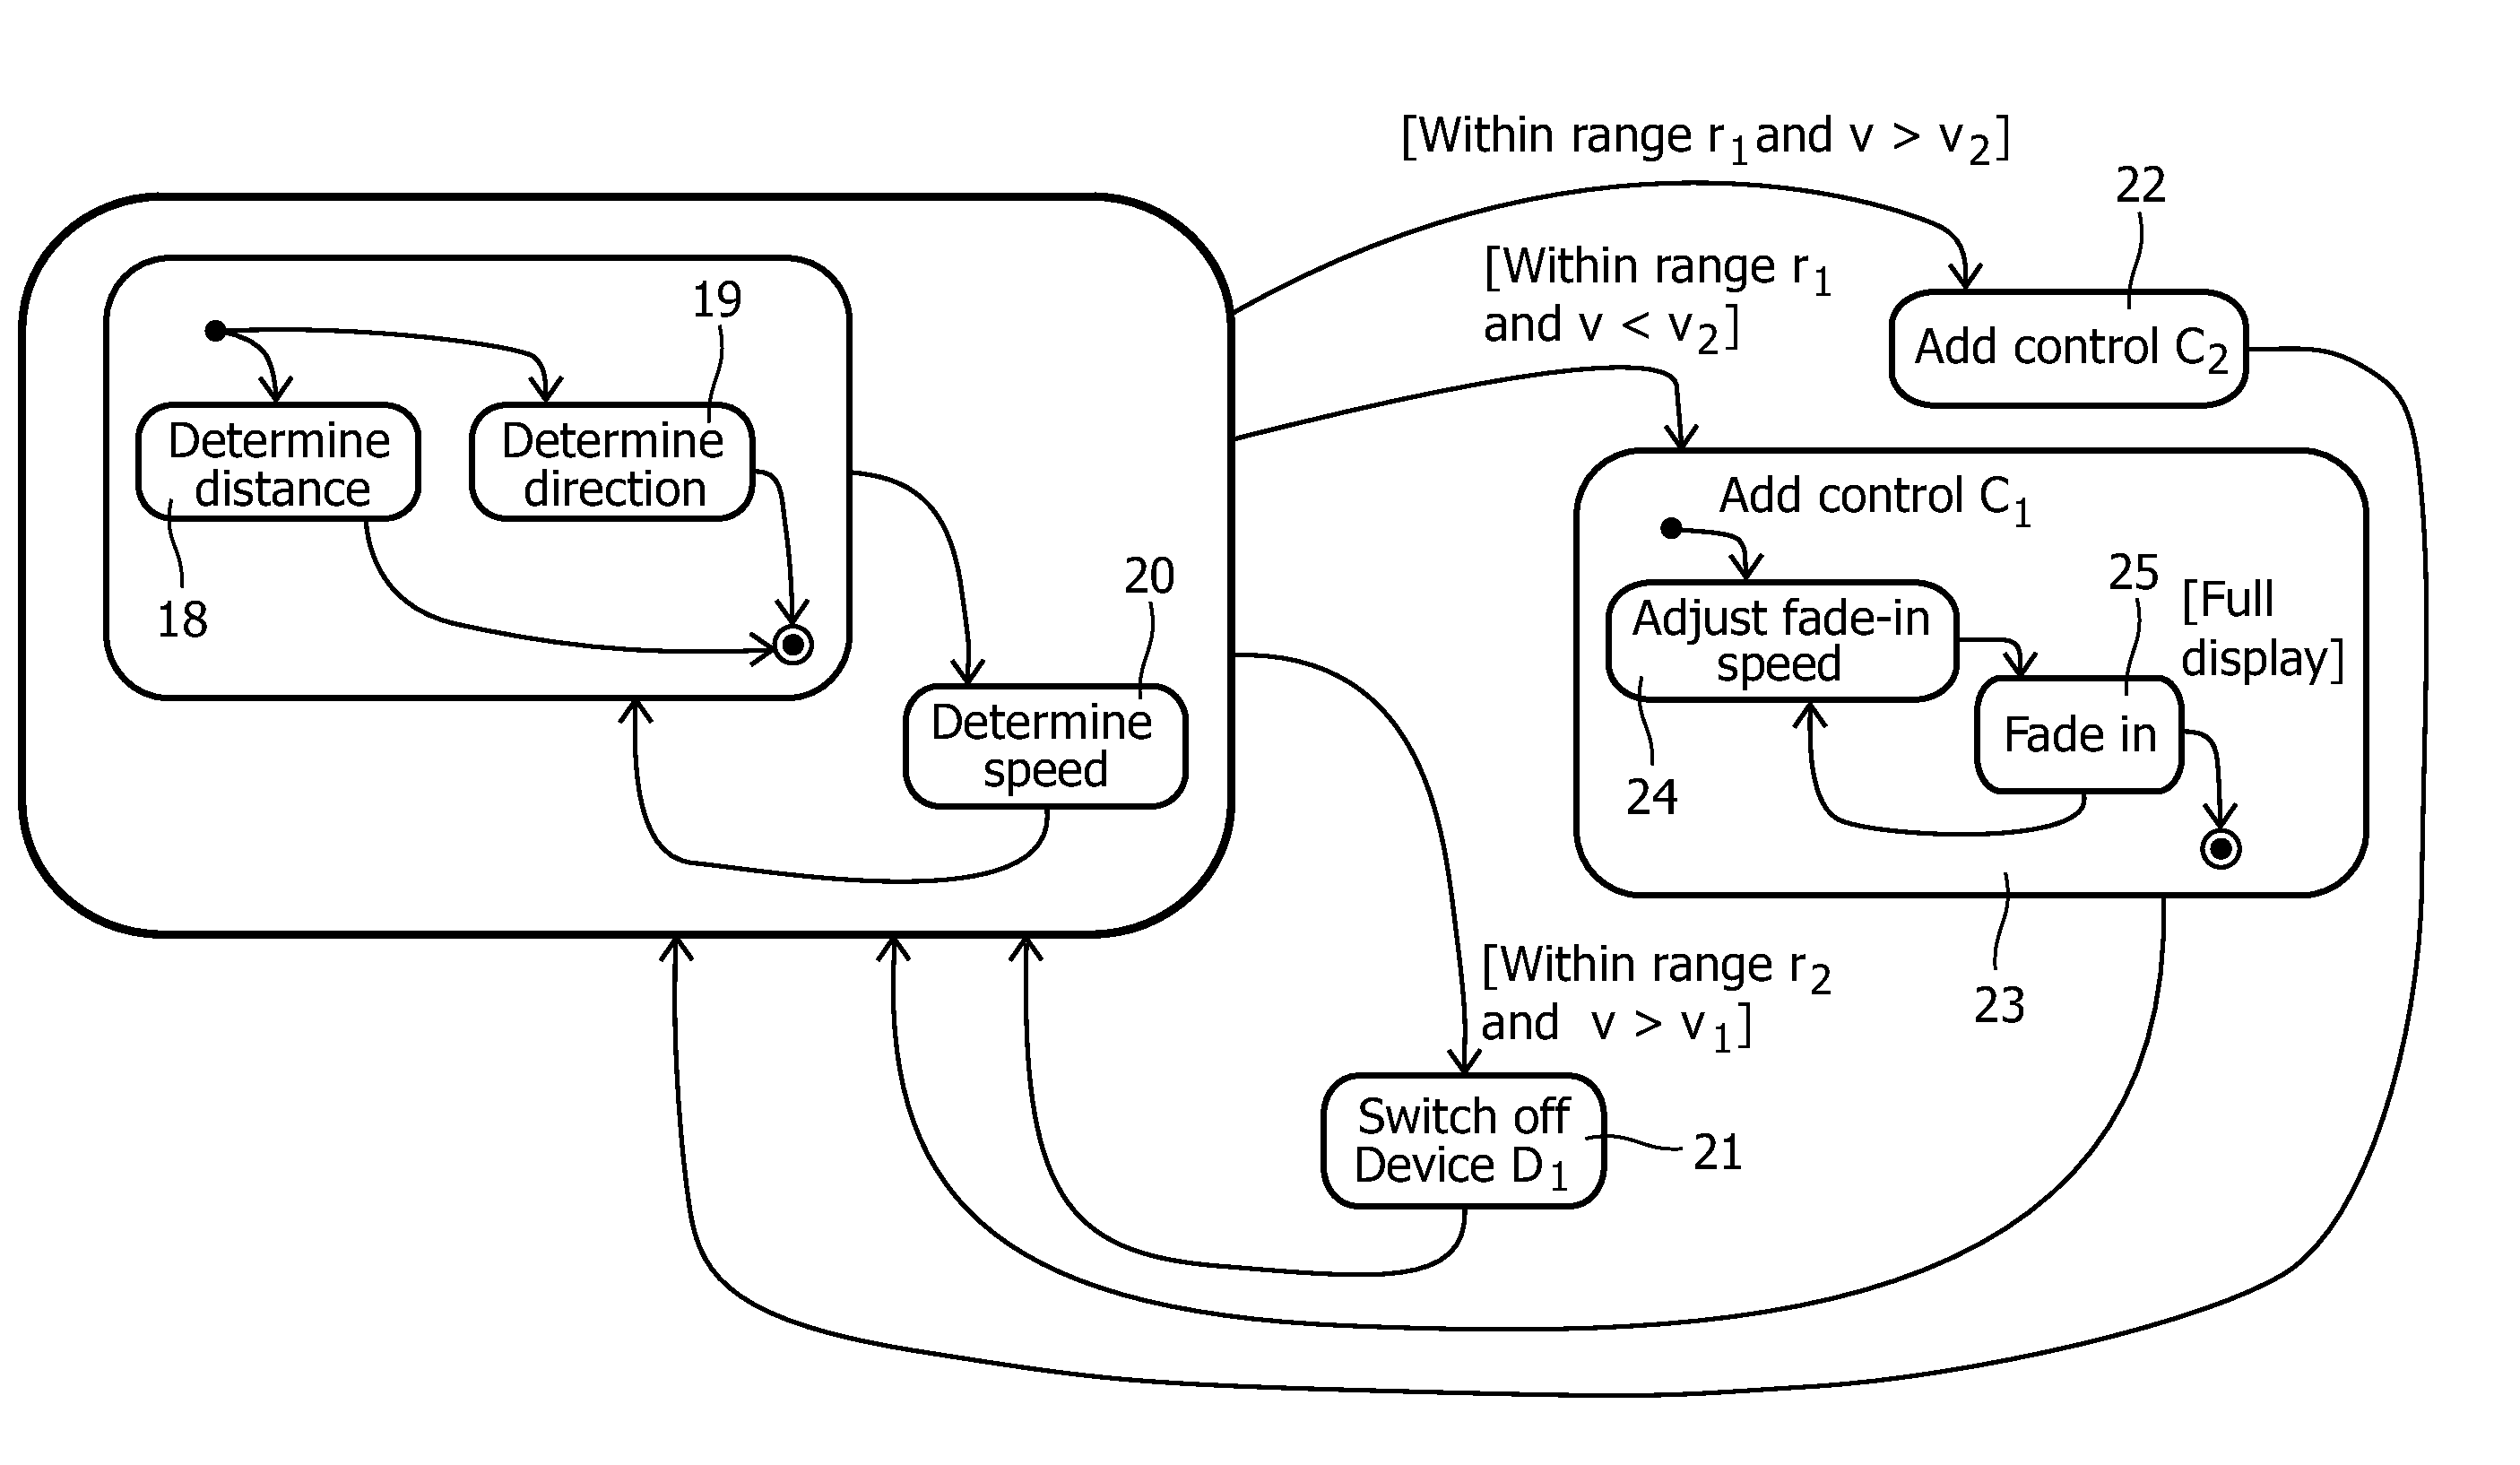 Method of providing a user interface